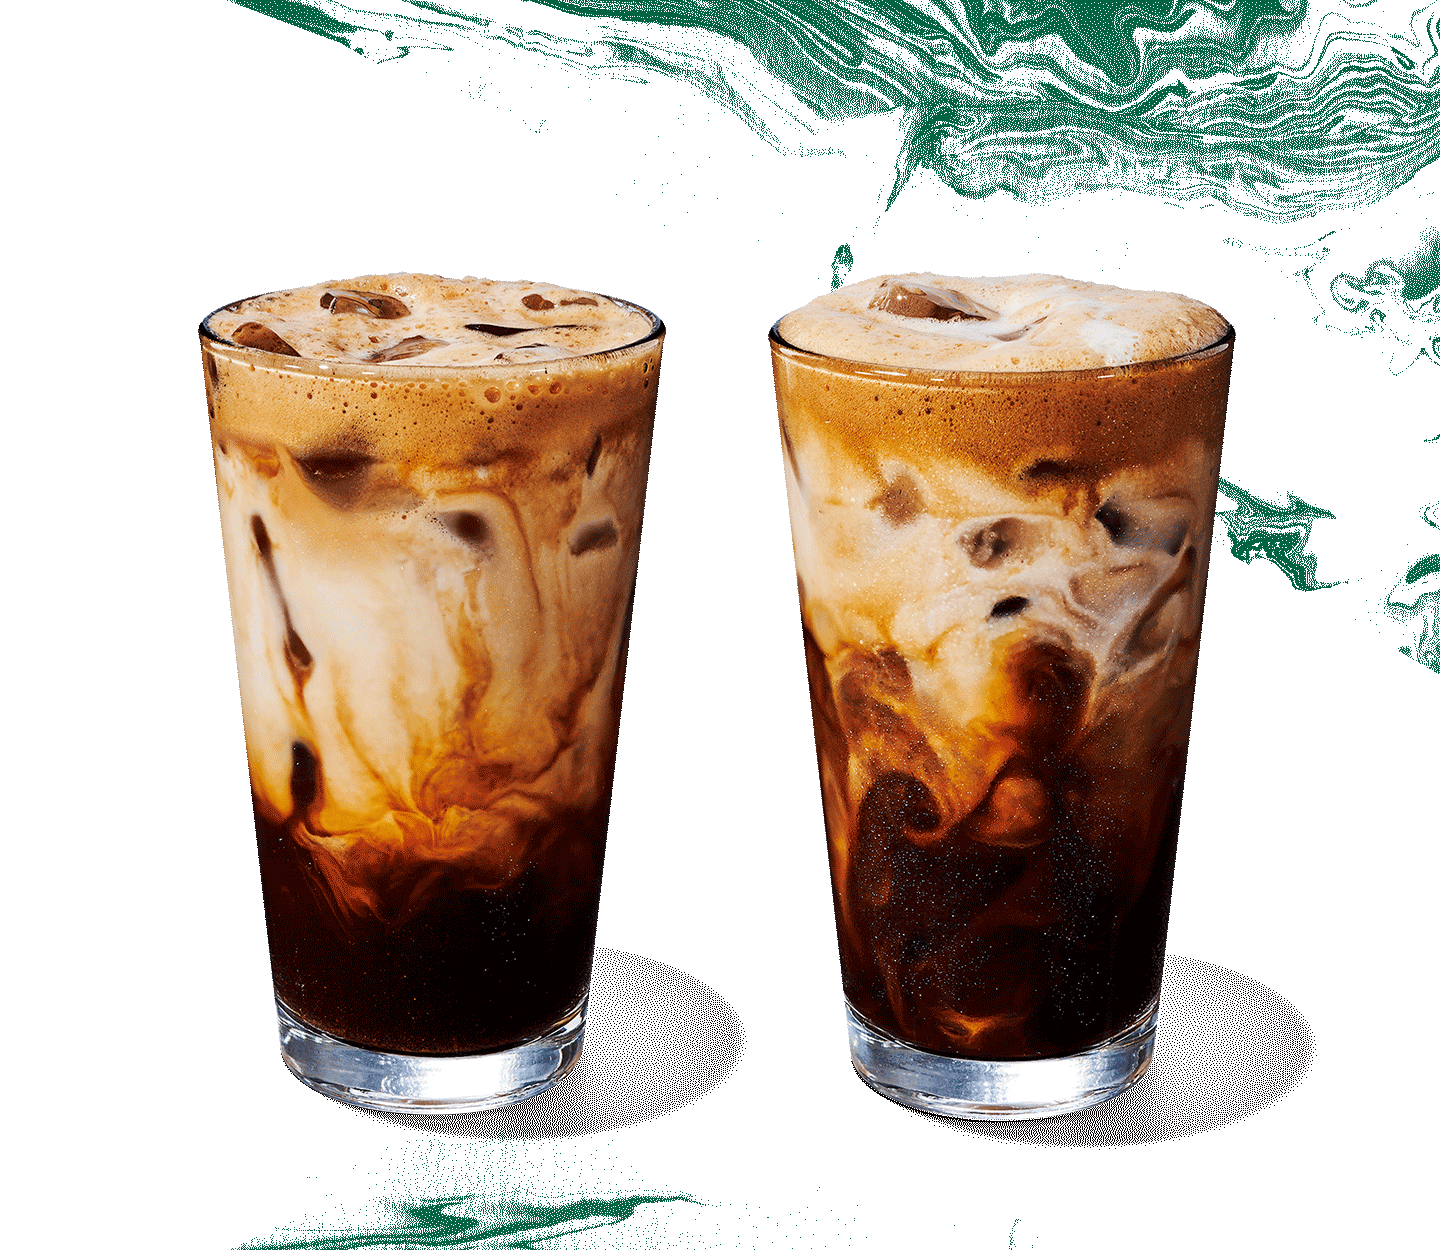 Two iced coffee drinks in tall glasses, dark at the bottom and marbled toward the top